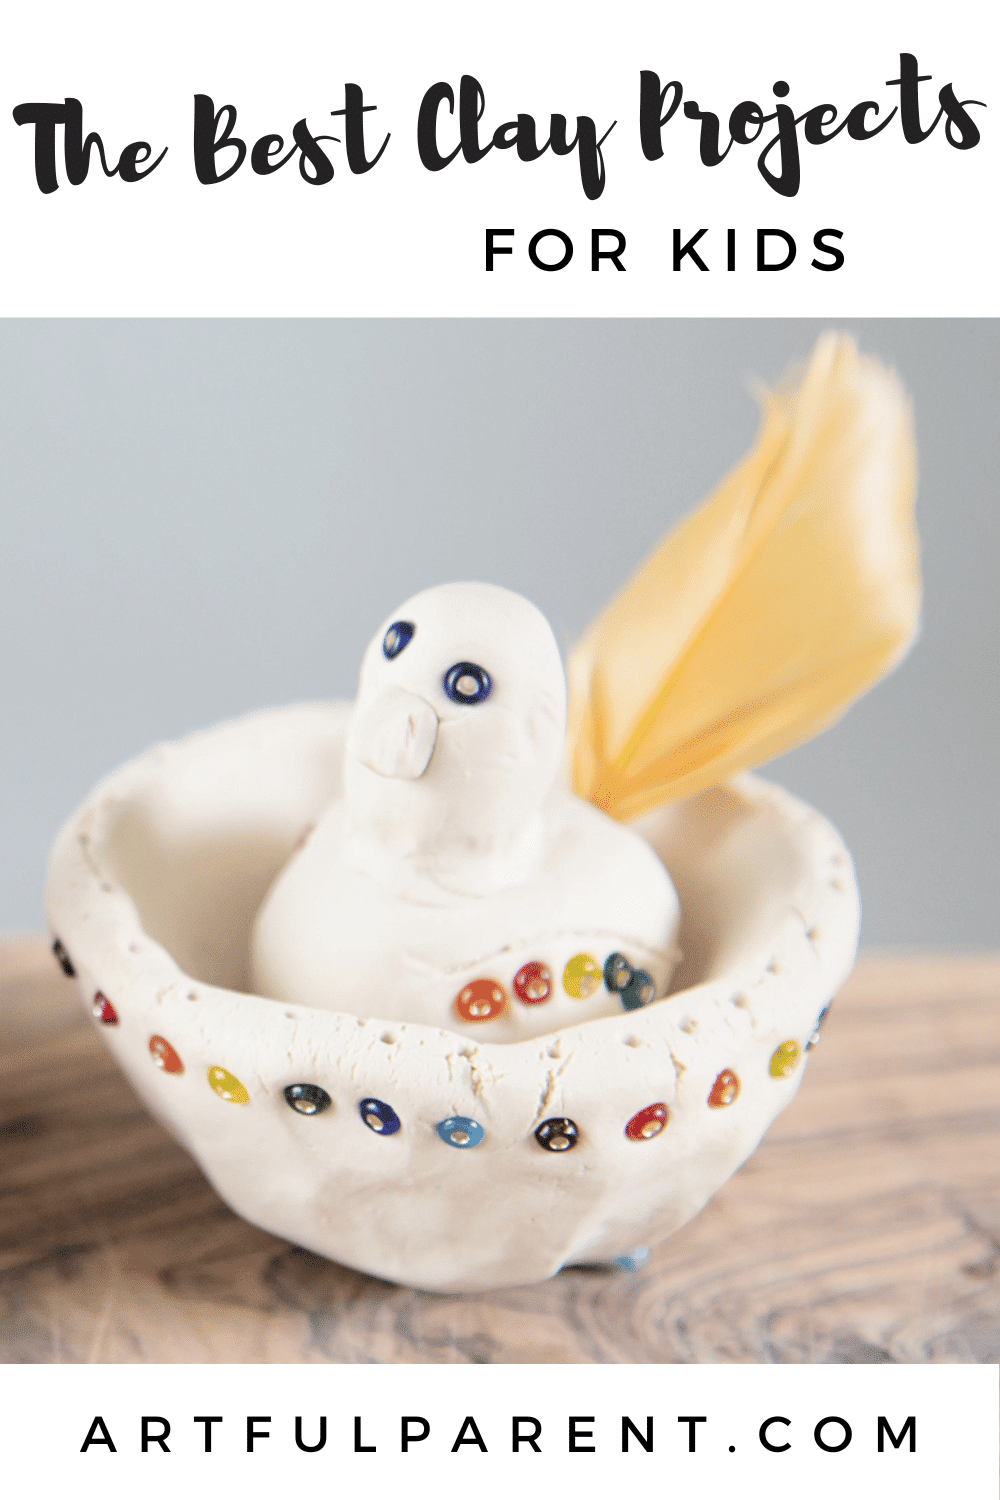 15 Awesome Clay Projects For Kids